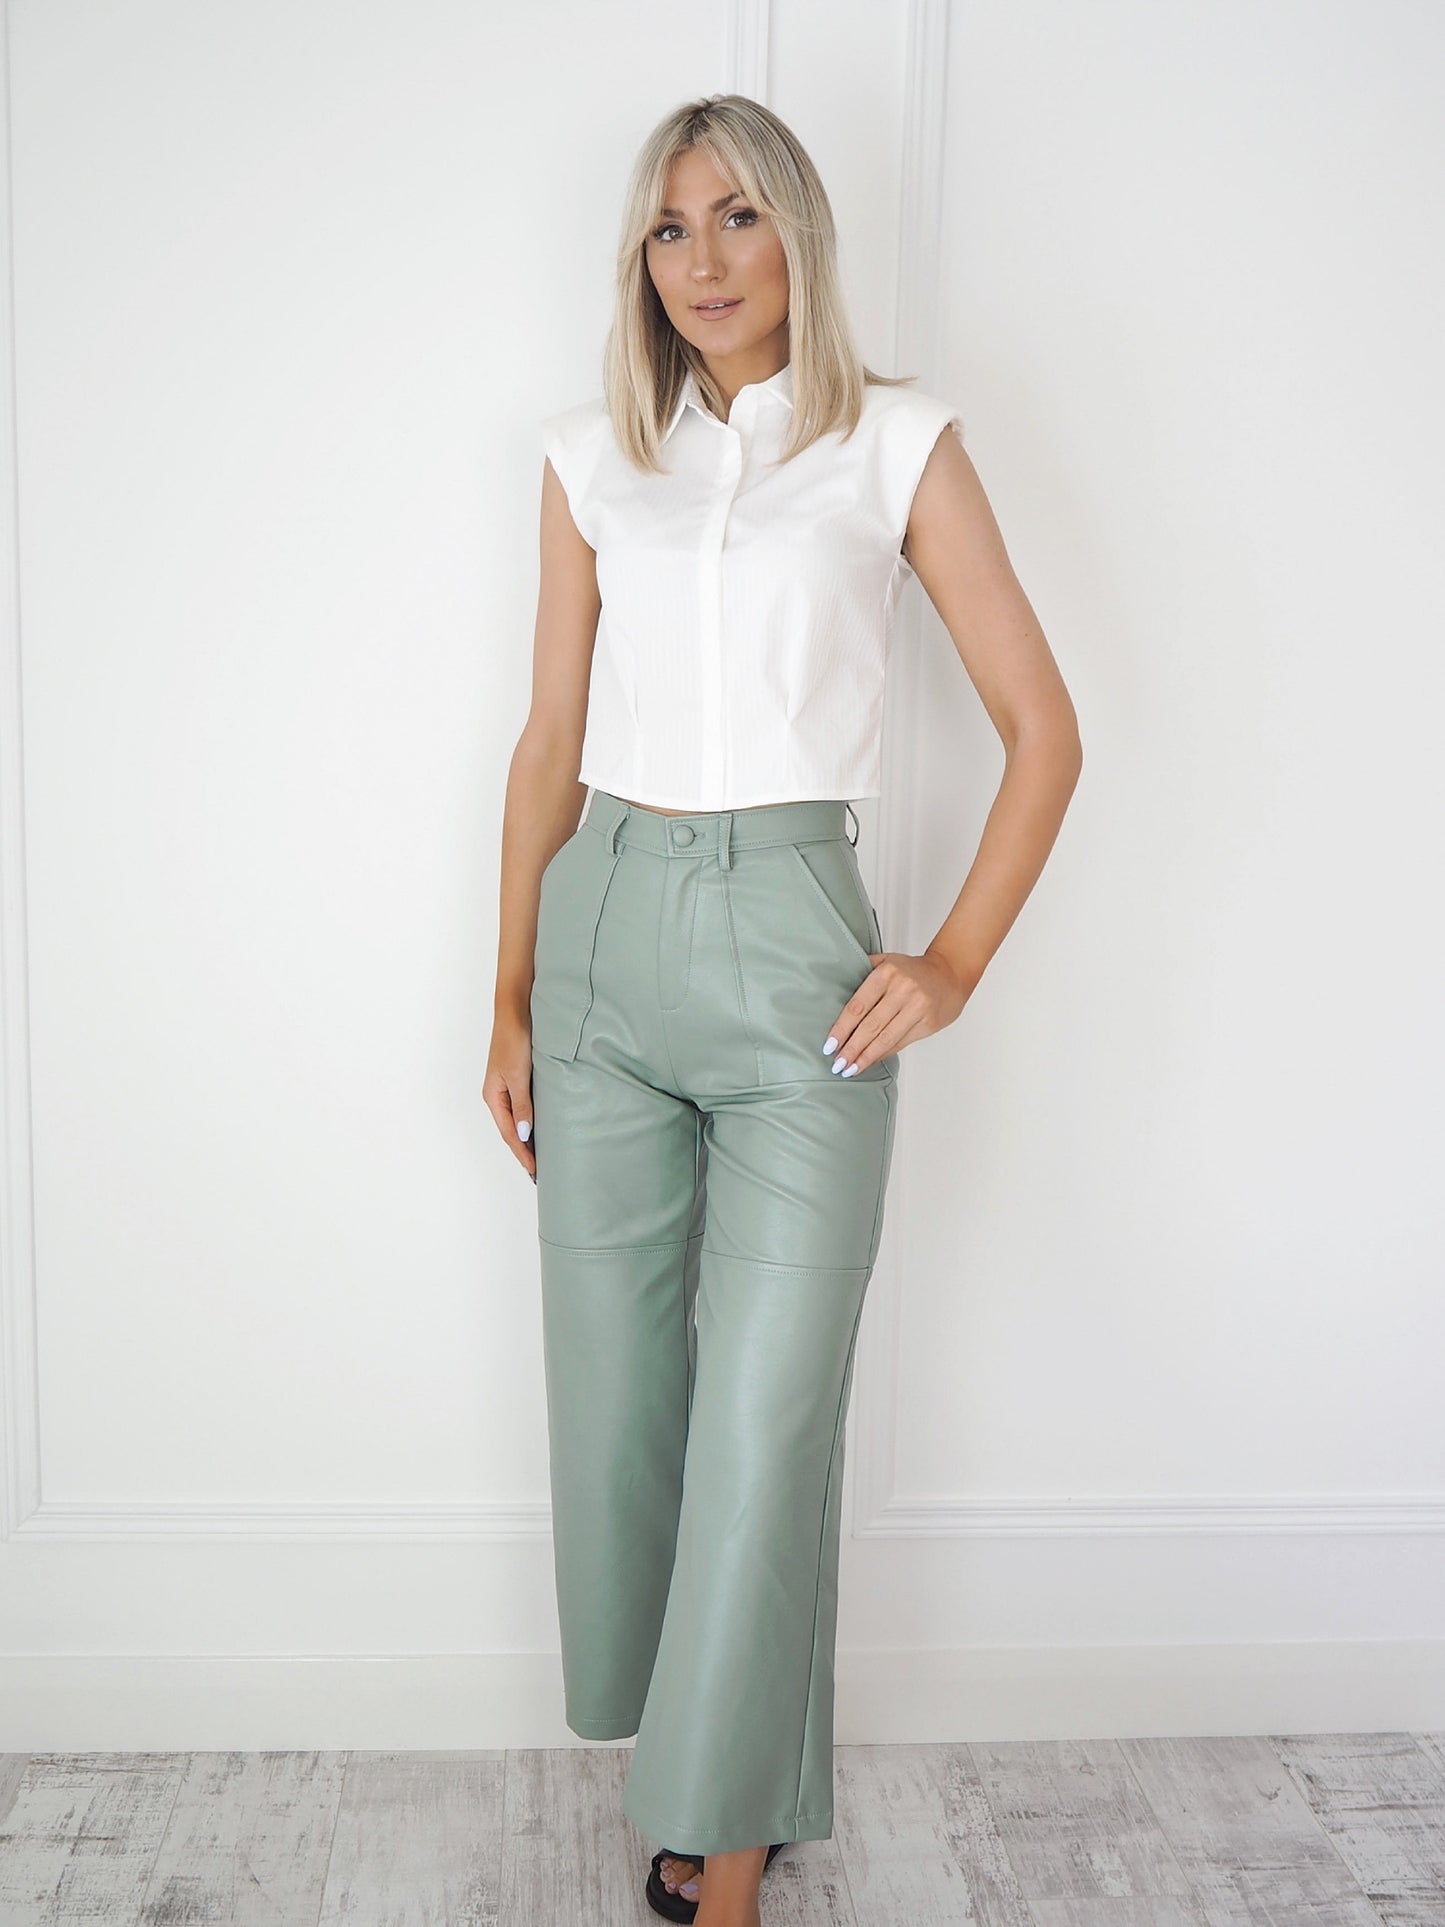 Sage Green Faux Leather Trousers